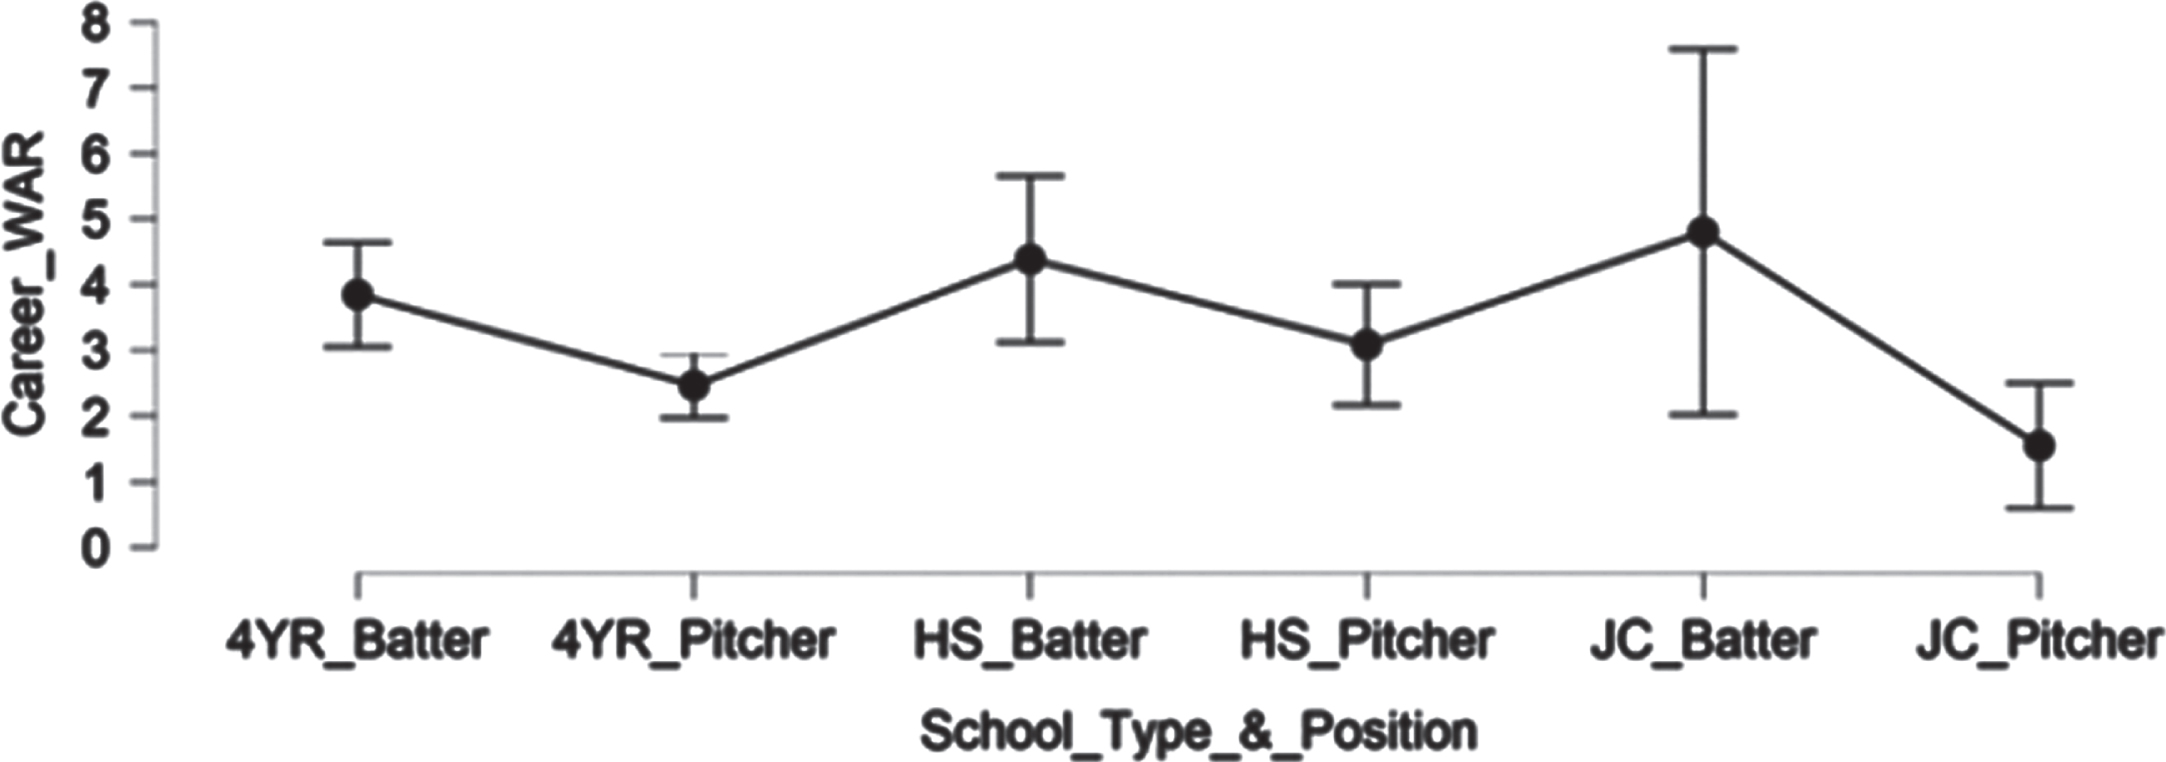 Career WAR differences by educational groupings in the first round. Less WAR was seen in first round pitchers from 4-year institutions compared to 4-year and high school hitters.